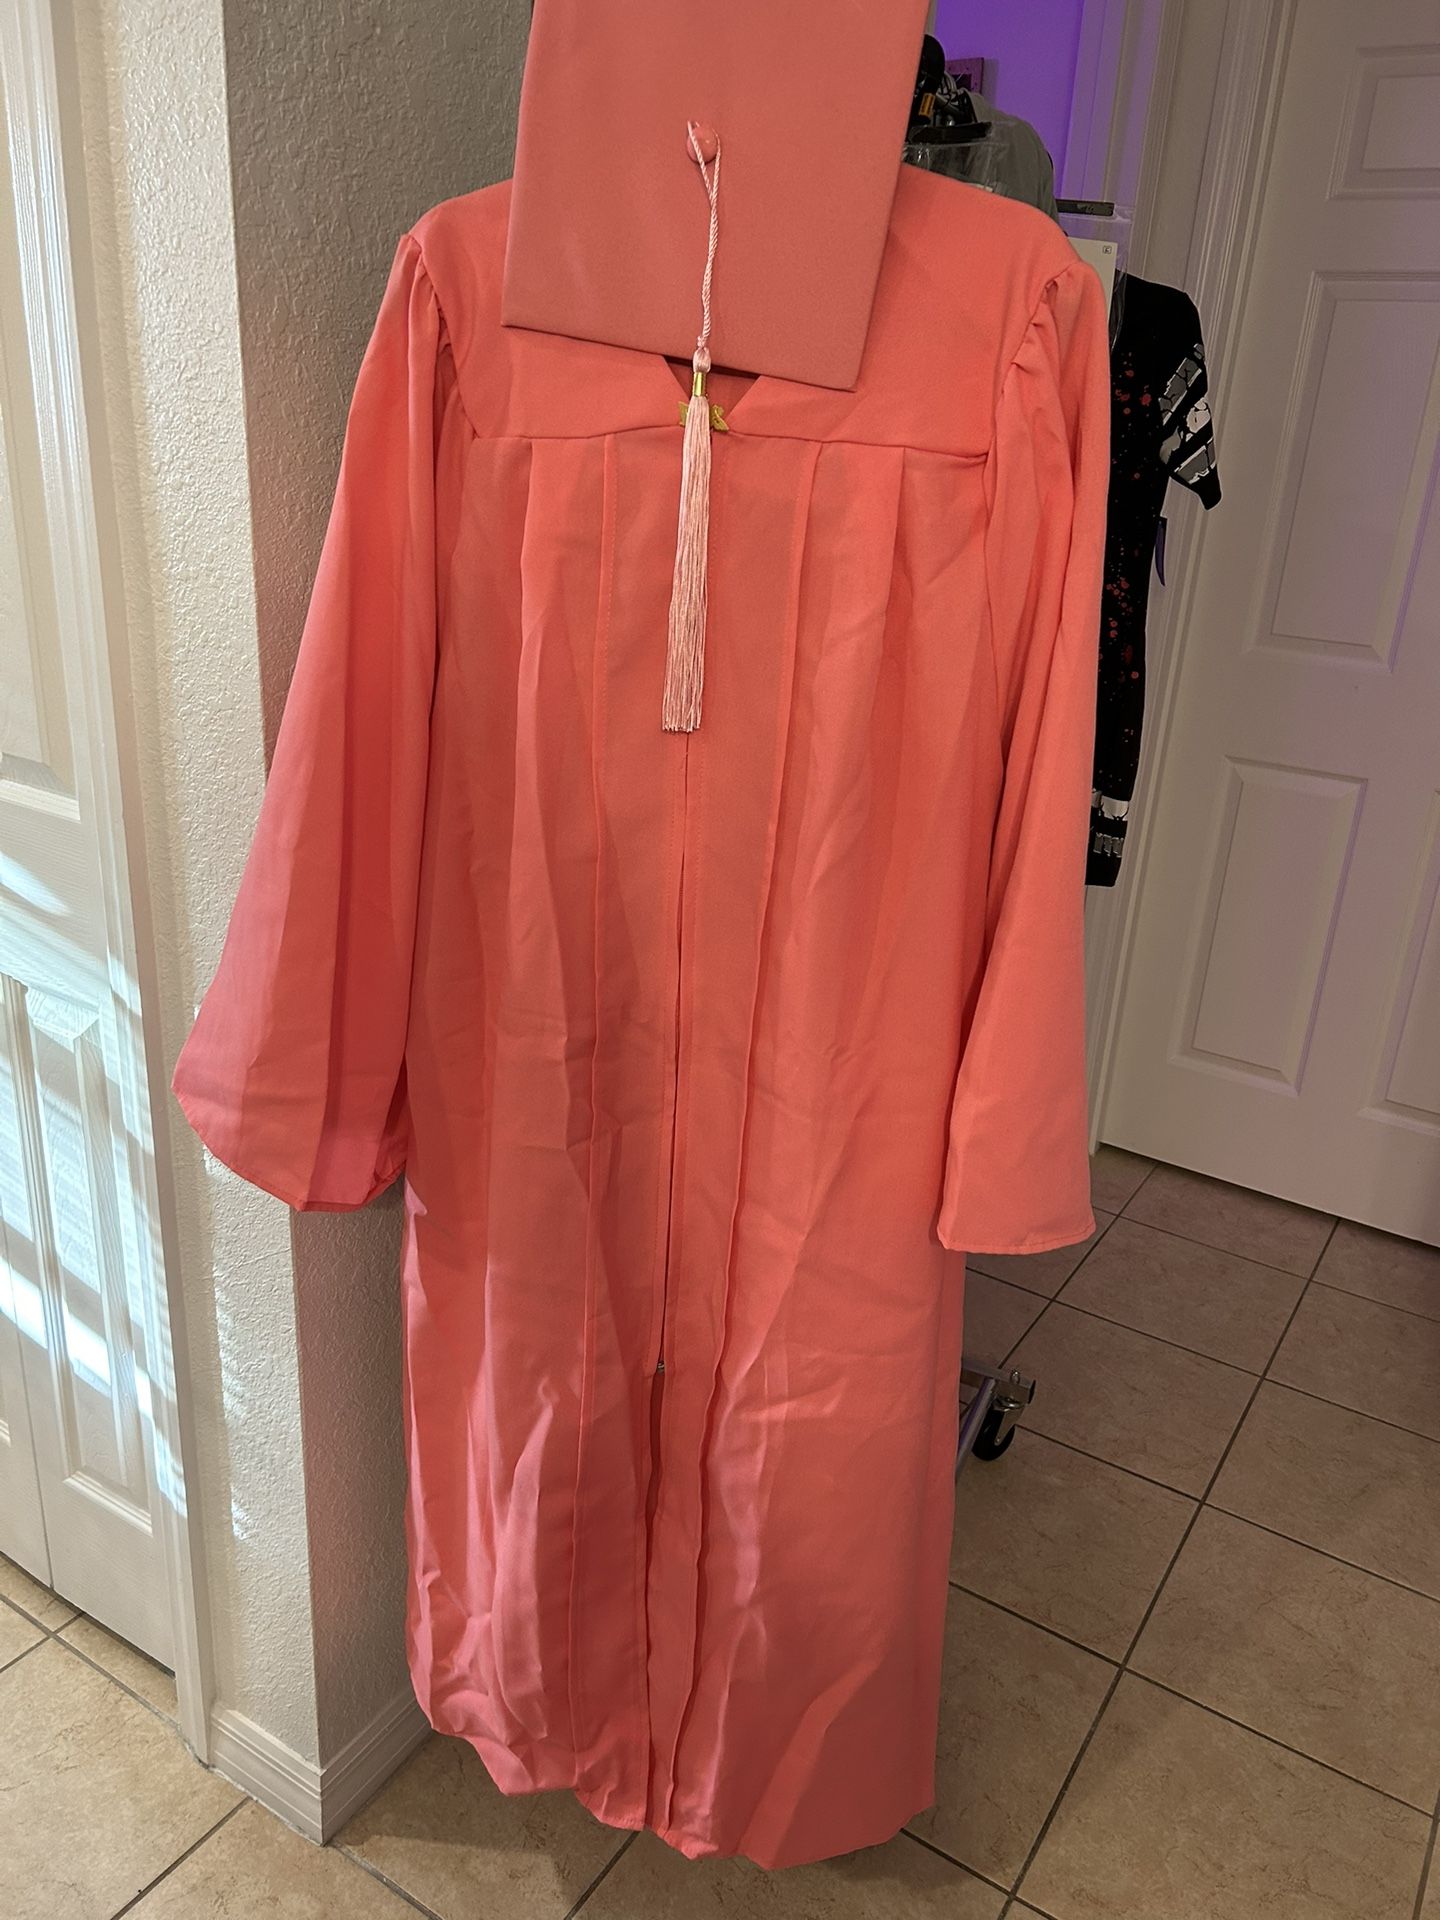 Cap And Gown Pink